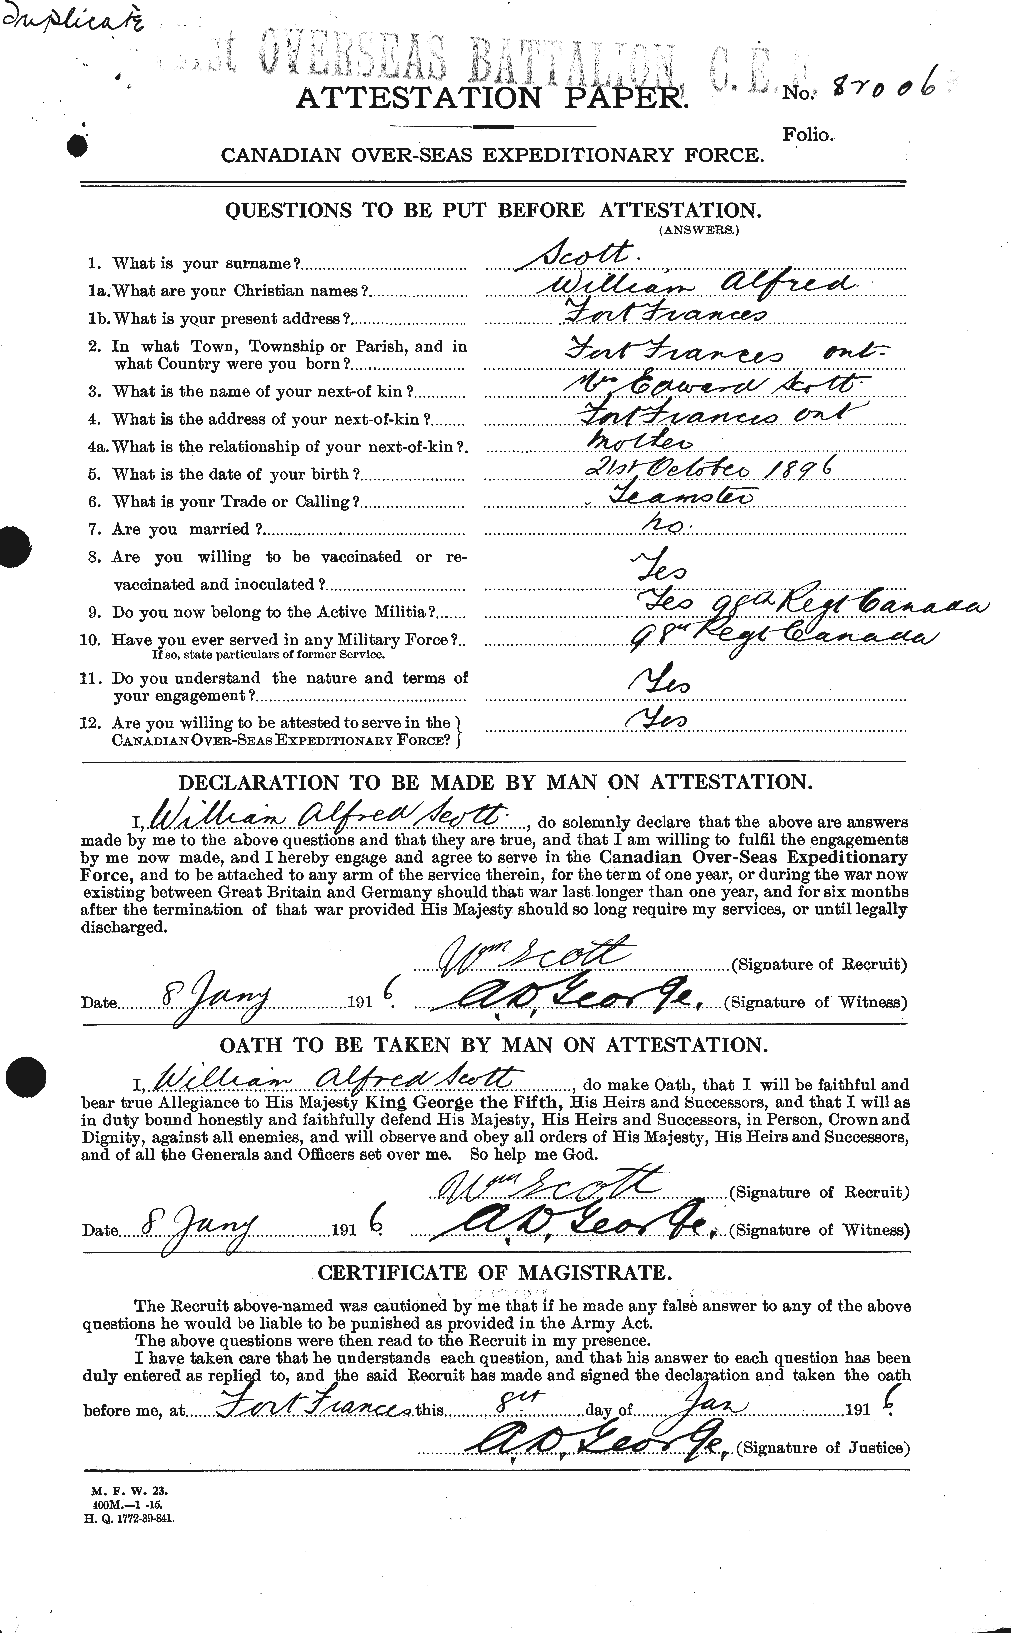 Personnel Records of the First World War - CEF 087332a